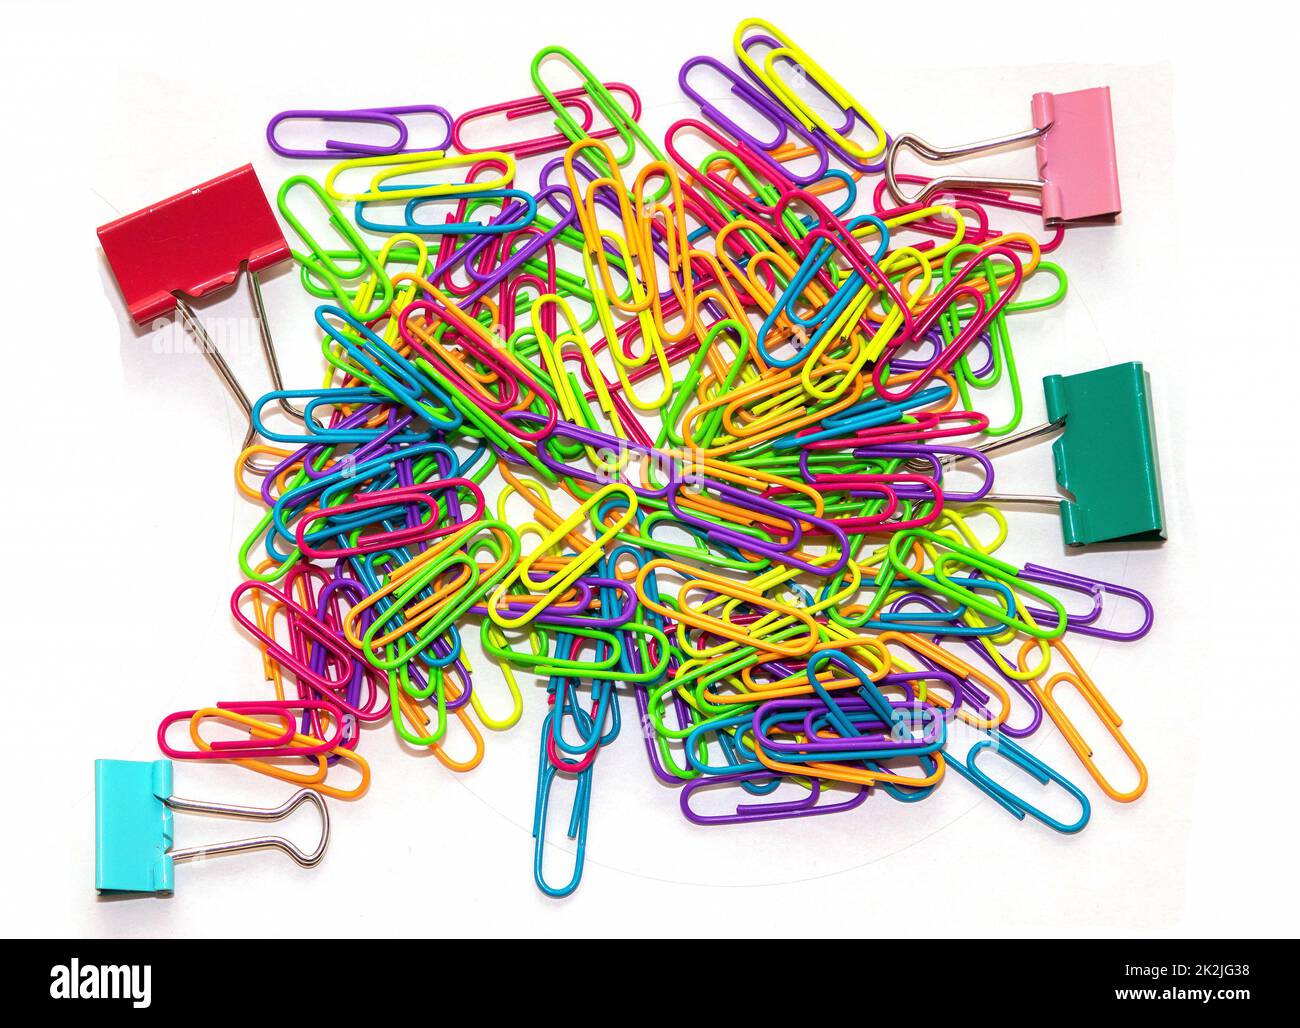 Colorful paper clips pile Stock Photo